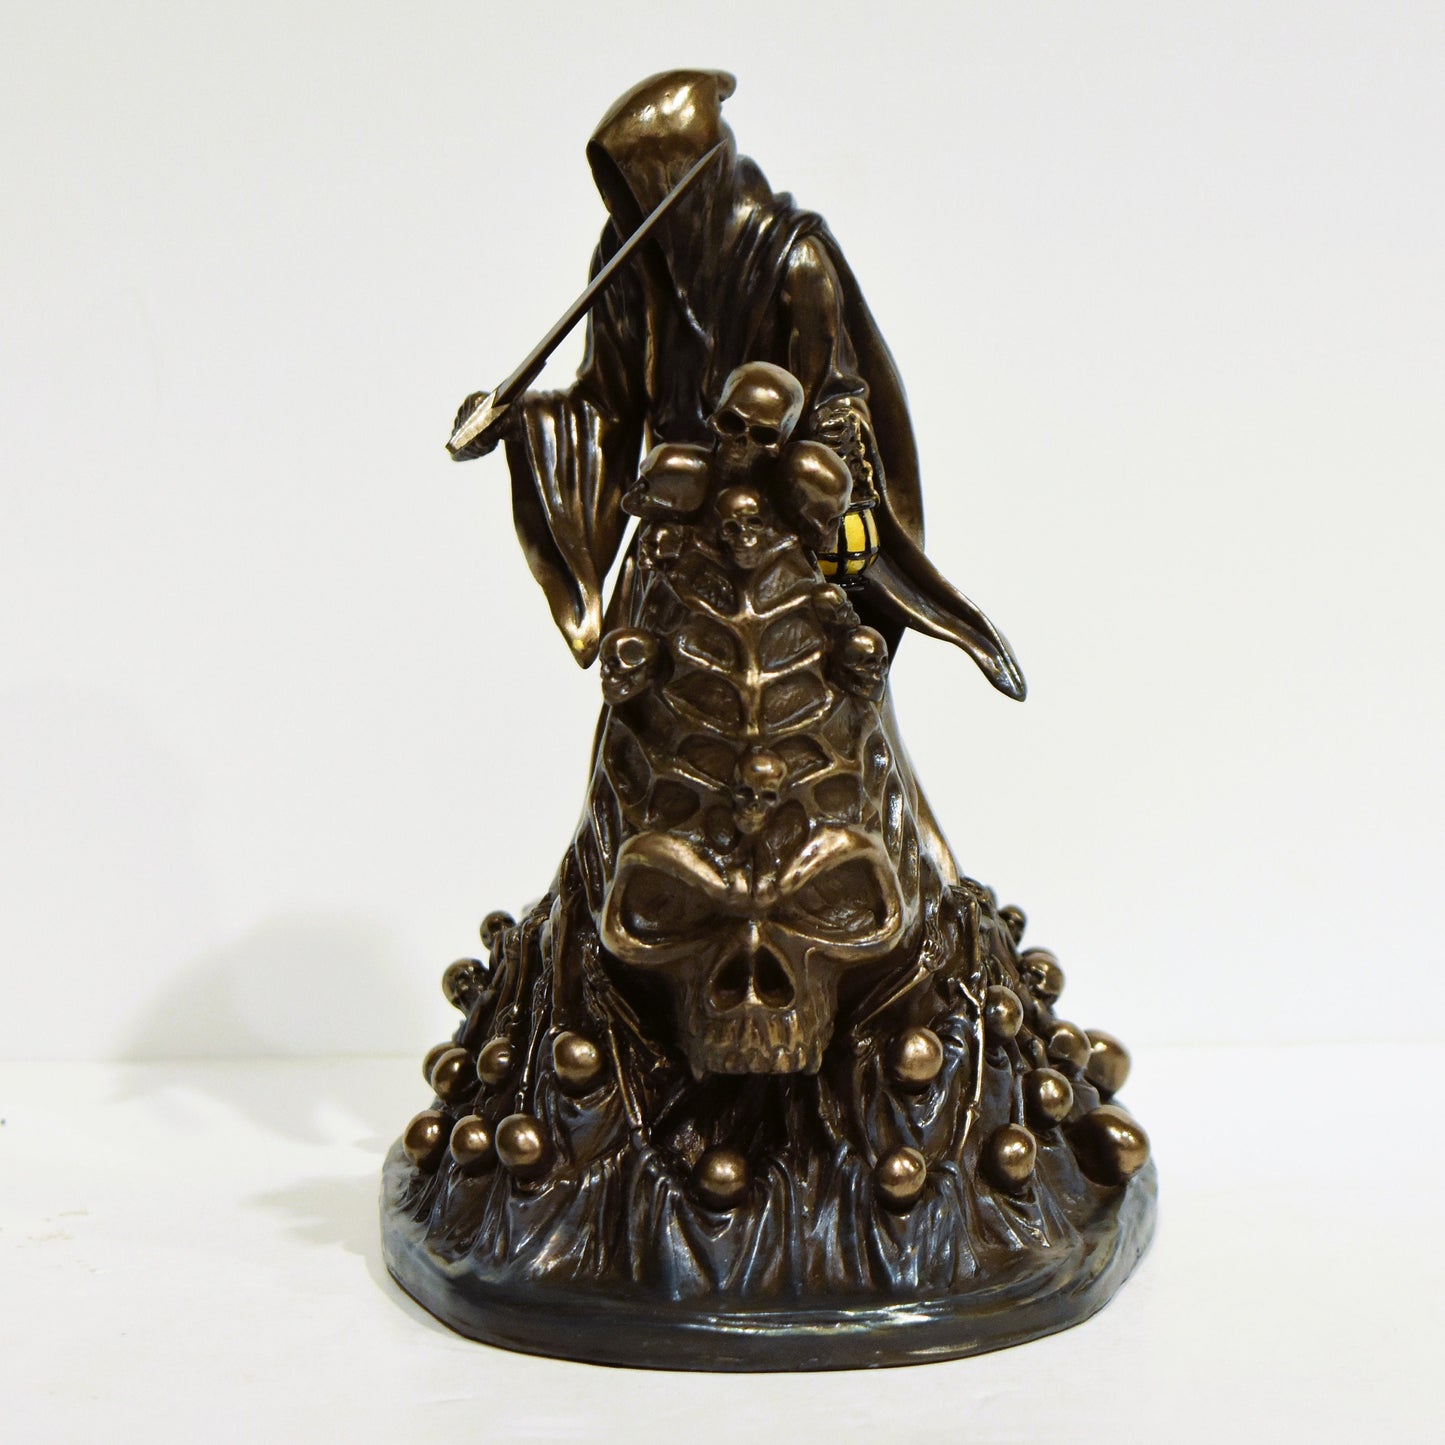 Charon -  Psychopomp - Ferry Over the Rivers Styx and Acheron Souls of the Deceased - Cold Cast Bronze Resin